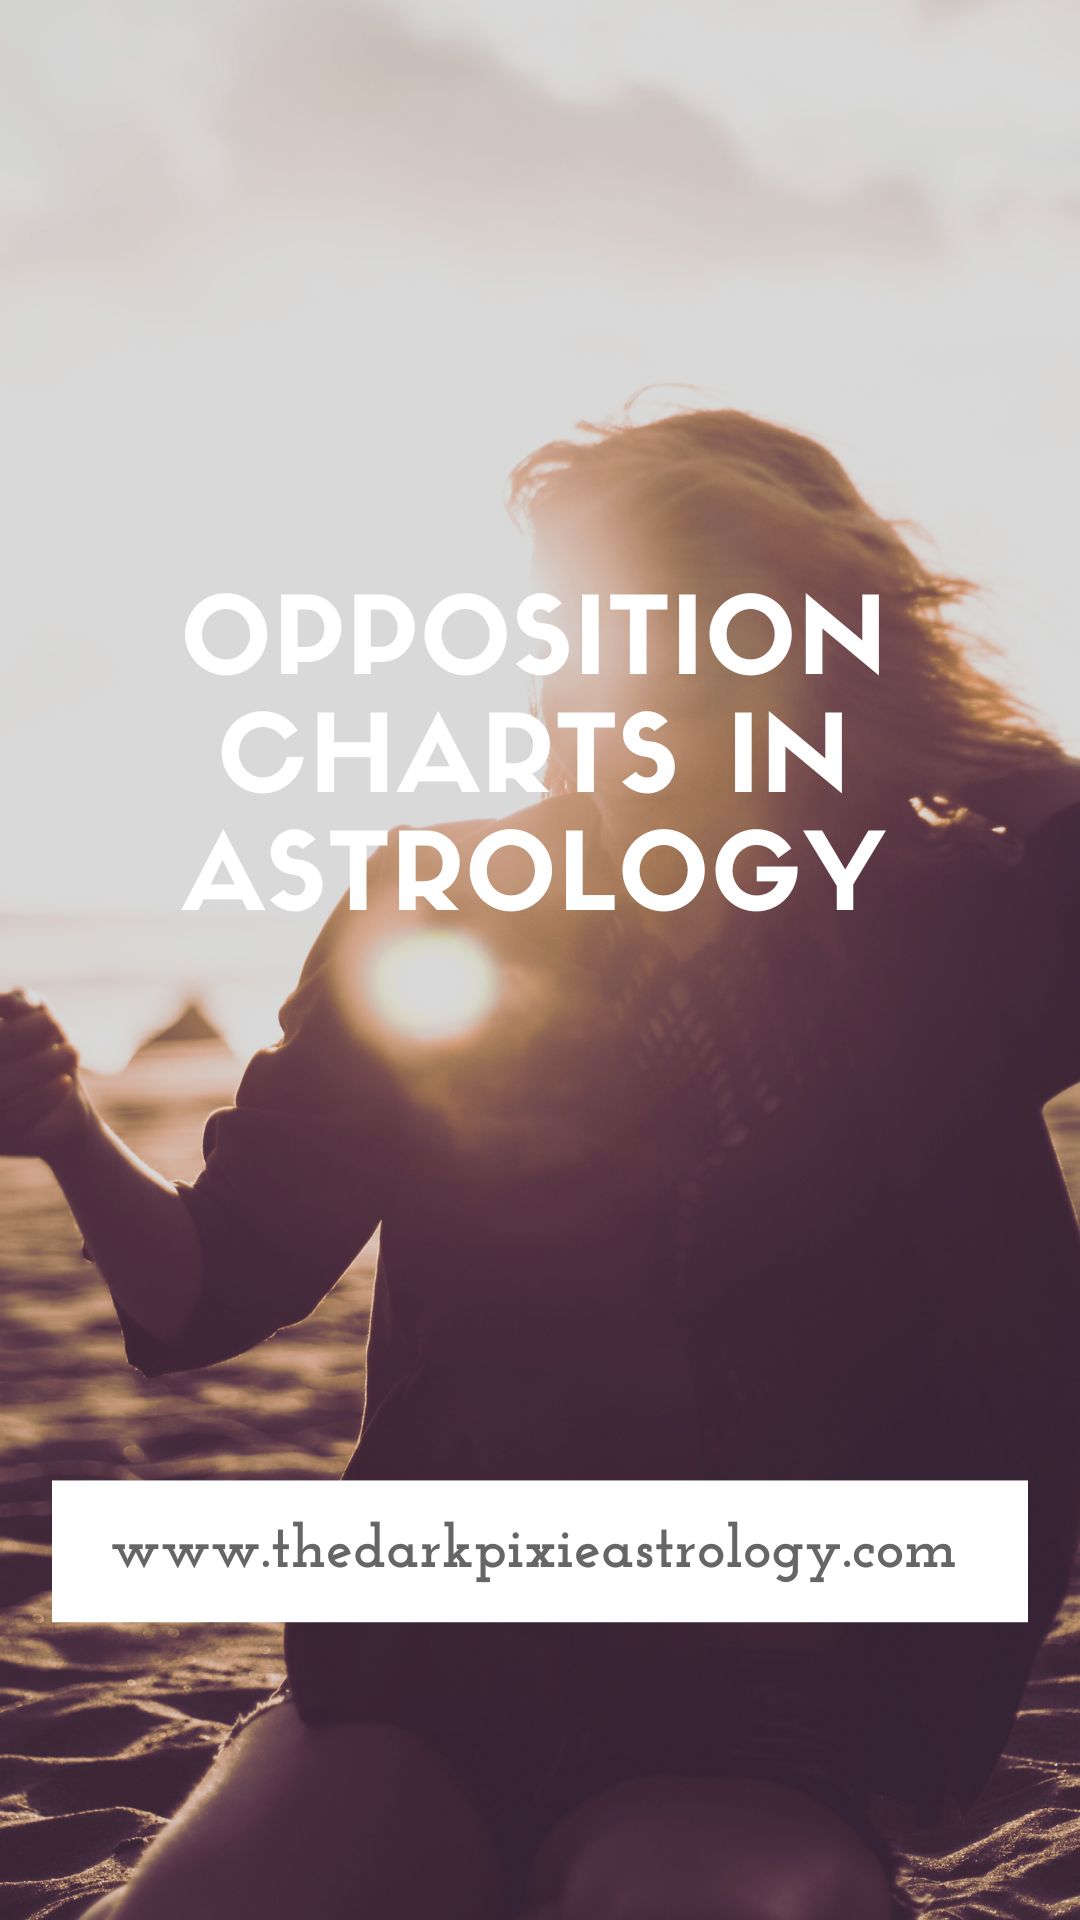 Opposition Charts in Astrology - The Dark Pixie Astrology